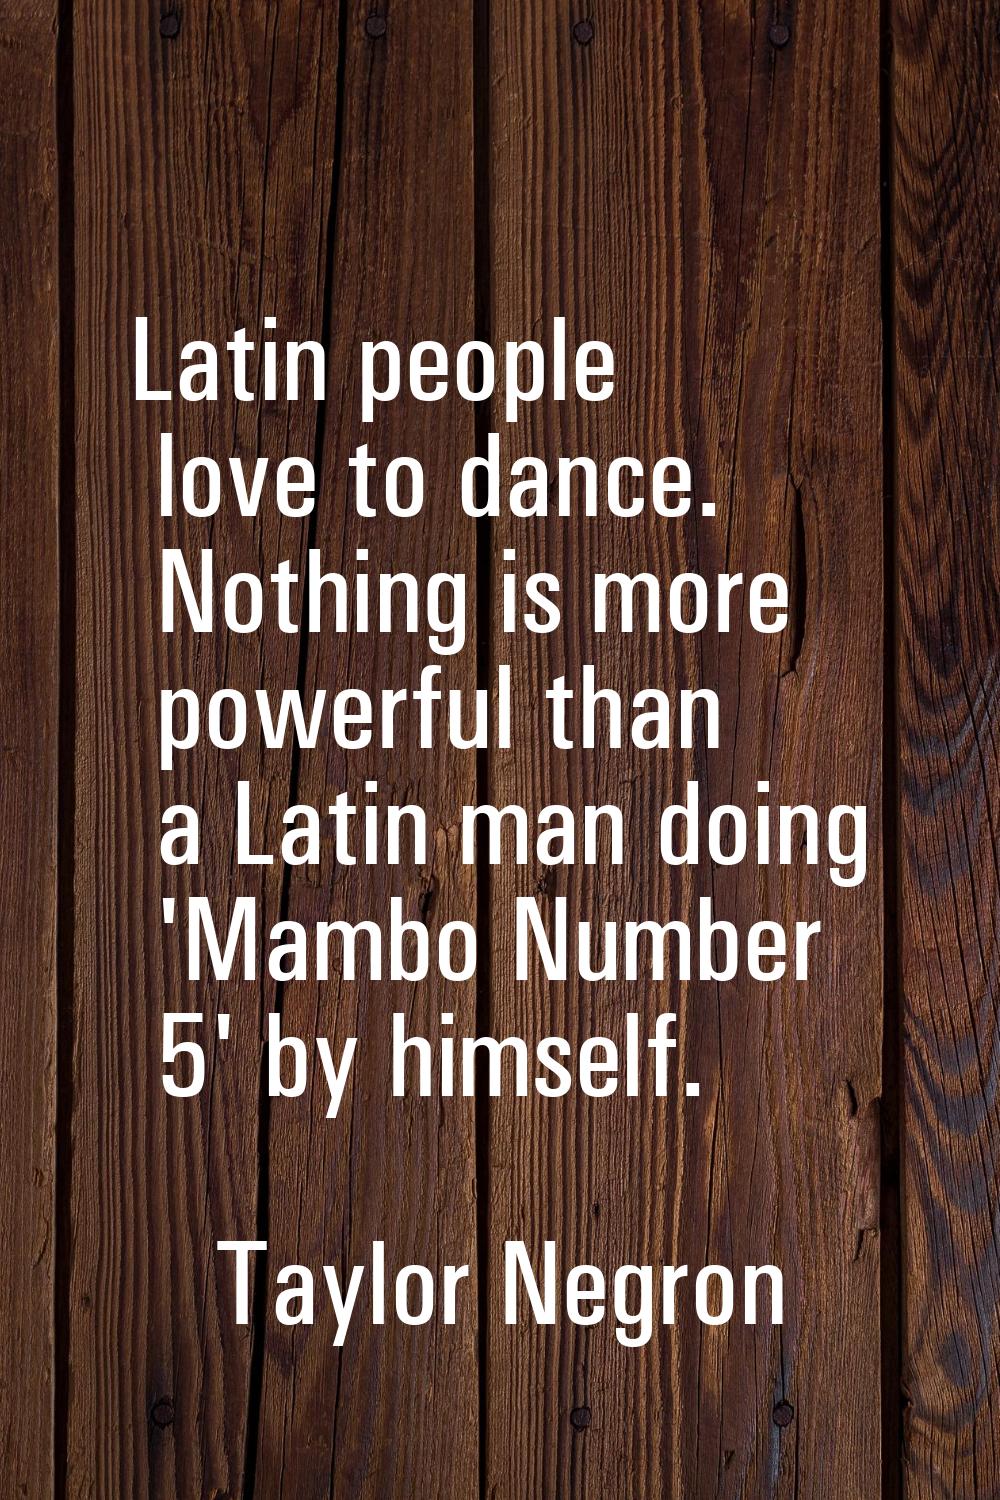 Latin people love to dance. Nothing is more powerful than a Latin man doing 'Mambo Number 5' by him